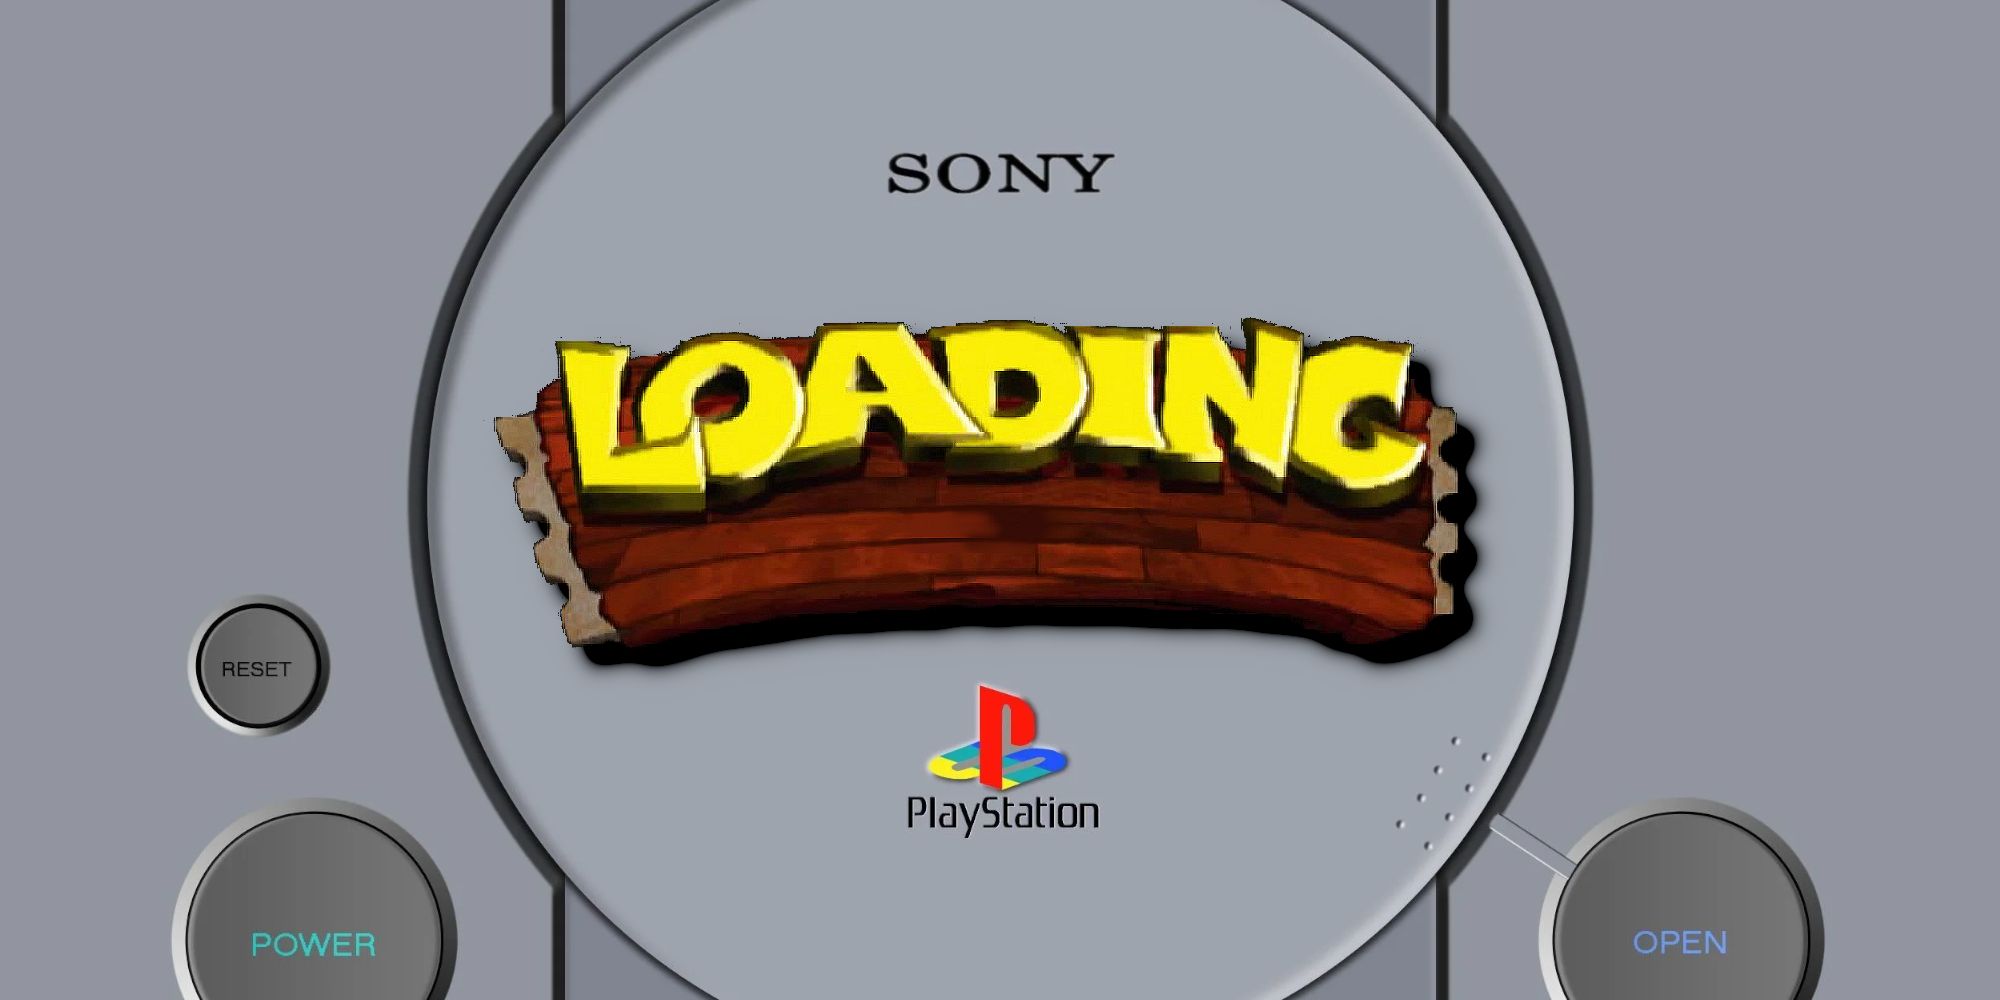 PS1 with Crash Bandicoot loading on top